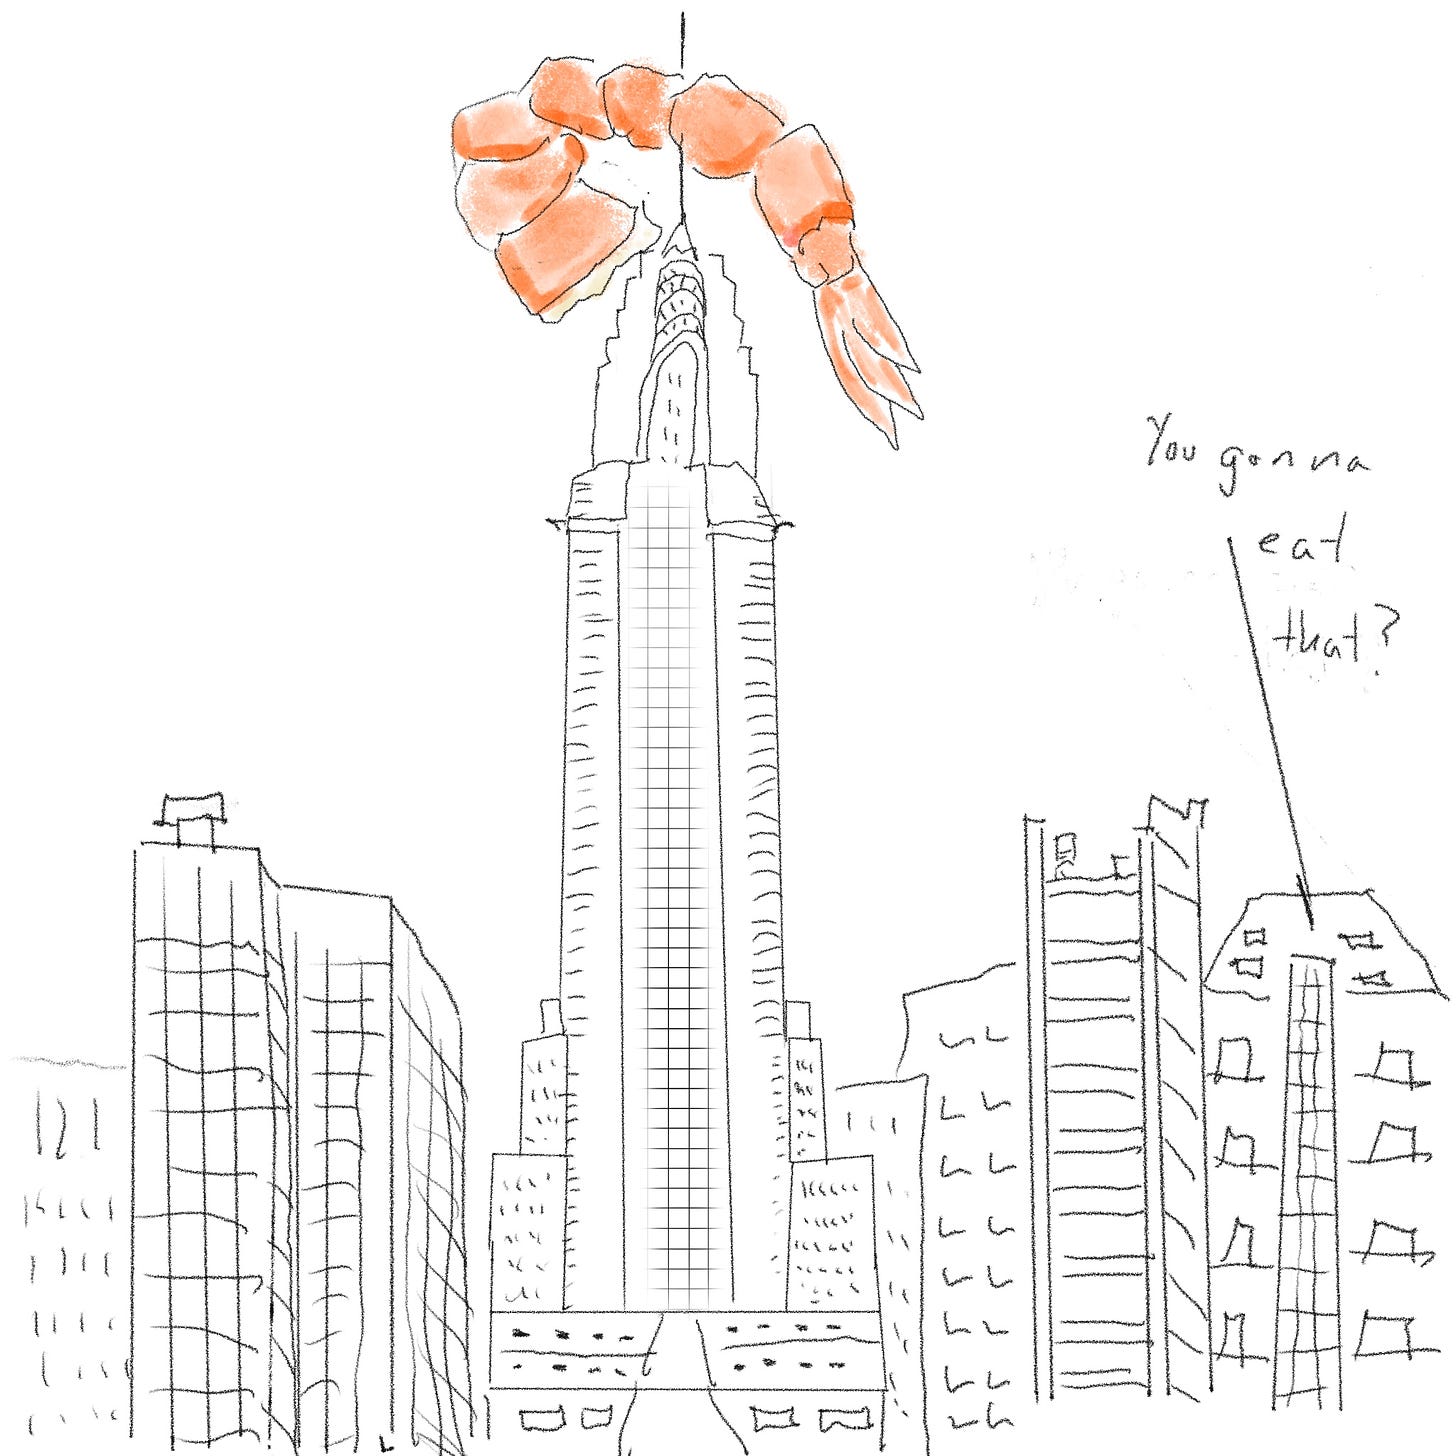 Chrysler building with a shrimp stuck on the tower